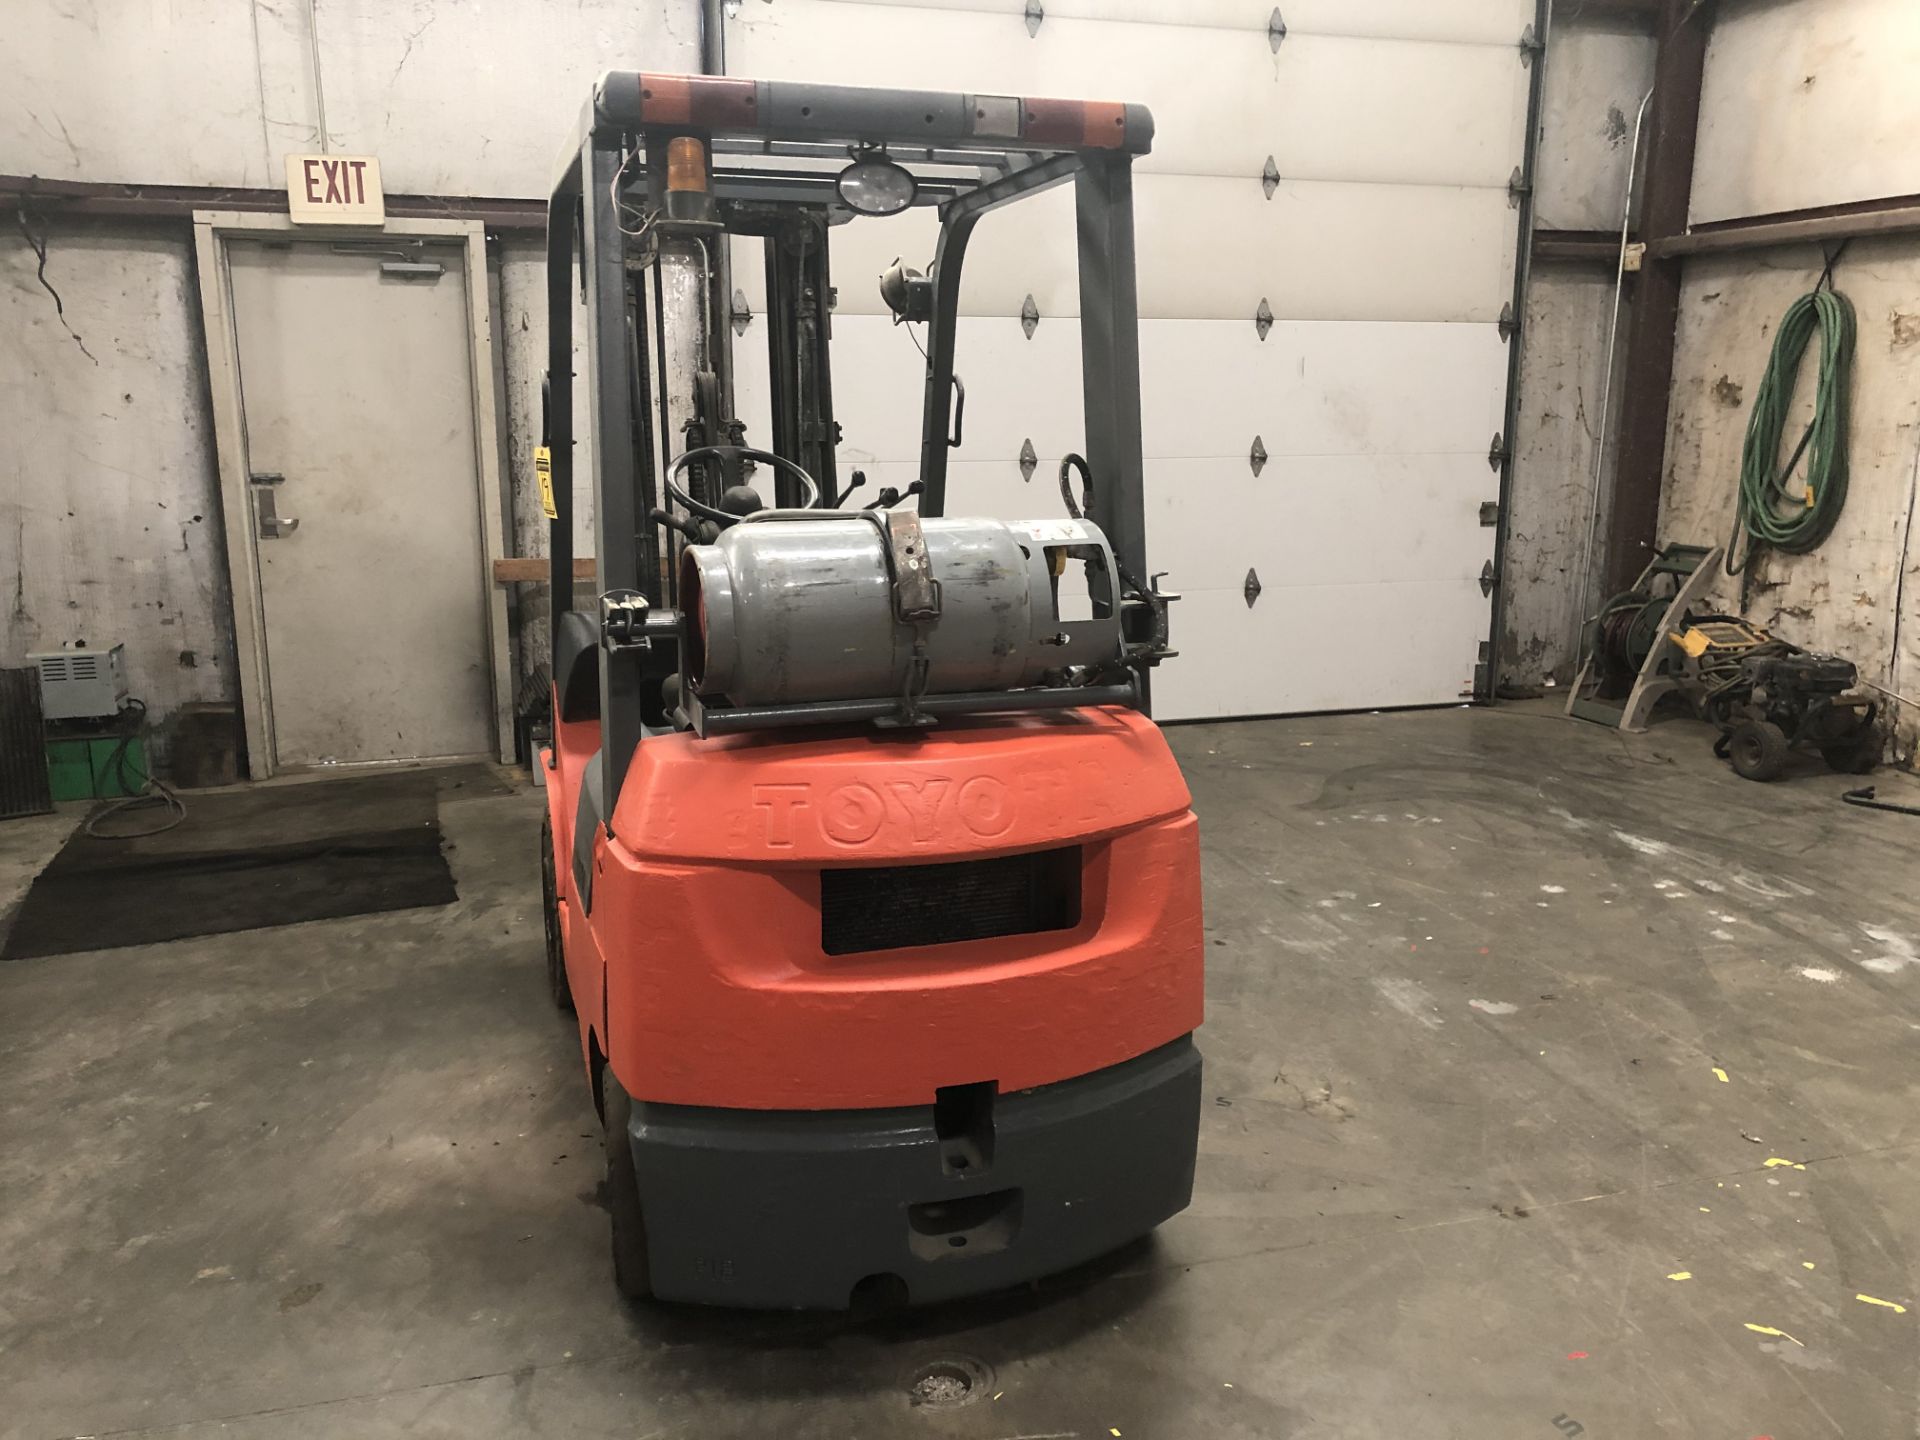 2005 TOYOTA 3,500-LB CAPACITY FORKLIFT, MODEL: 7FGU18, S/N: 65917, LPG *FORKS WON'T MOVE UP OR DOWN* - Image 2 of 5